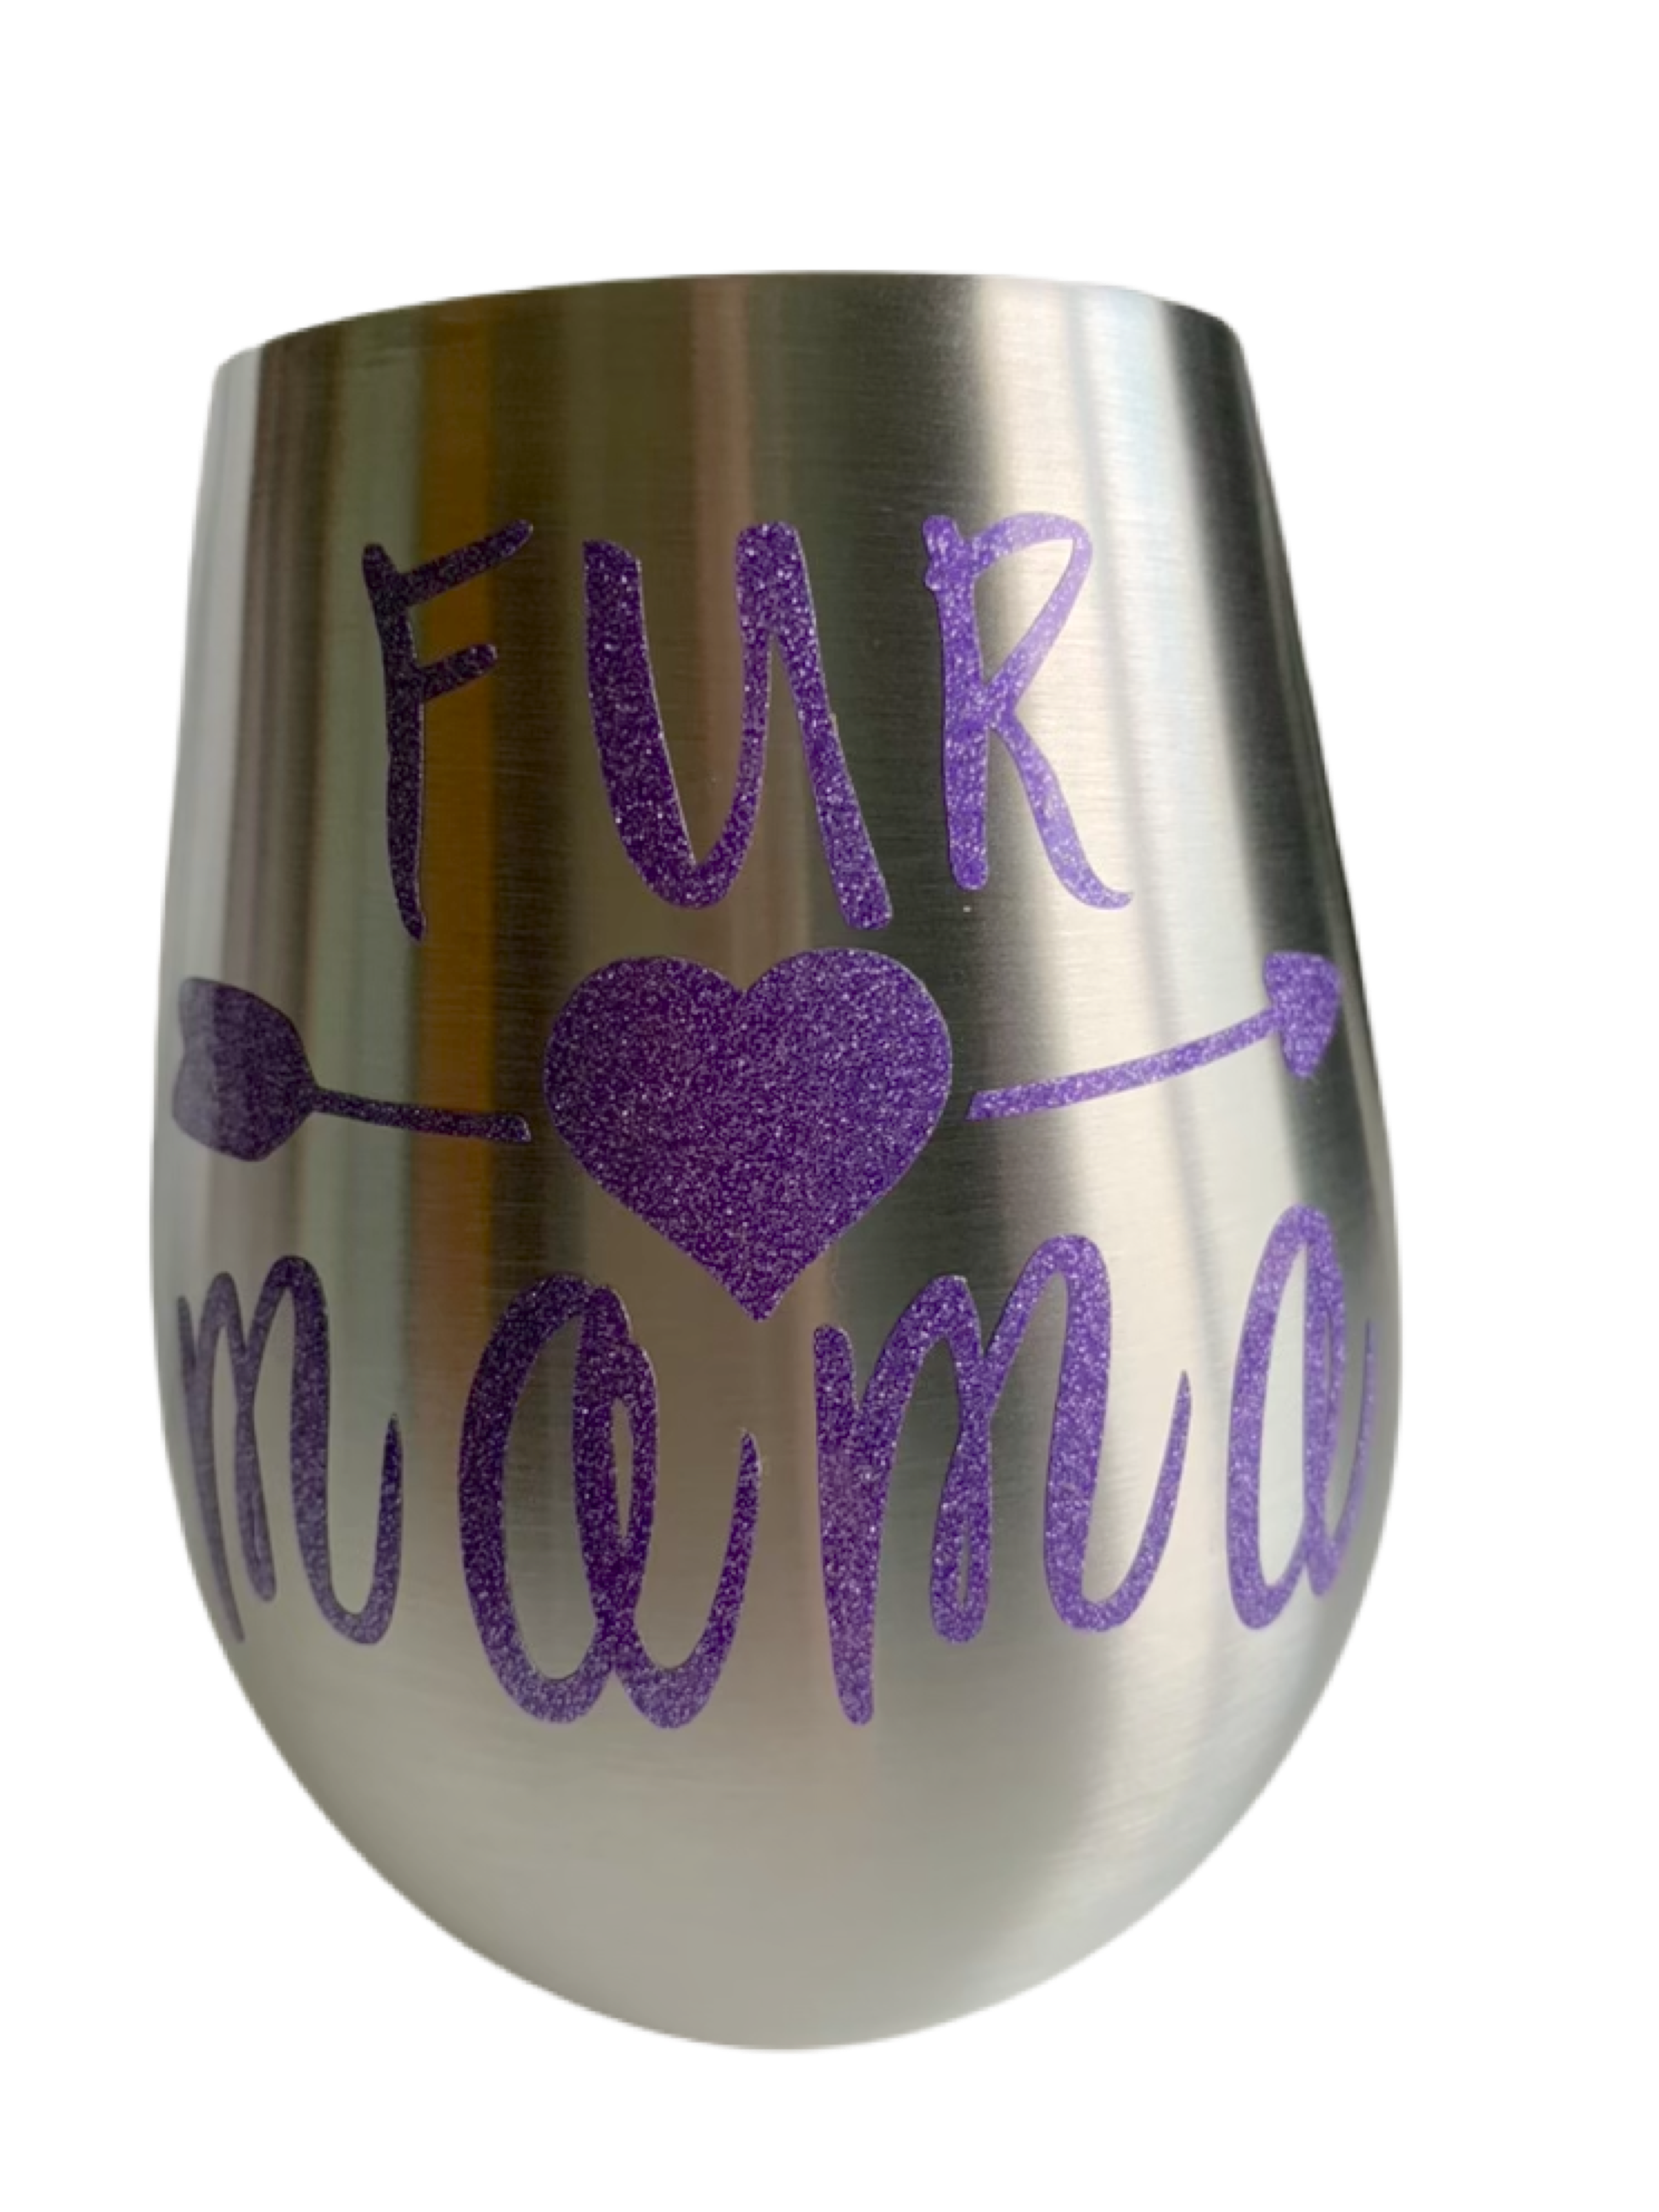 Stemless wine glasses with cute dog designs made with sparkly vinyl. Glasses have a sleek and elegant design, and are made from food-grade stainless steel. These heavy-duty glasses are shatterproof and have a weighted base, making them tip resistant.